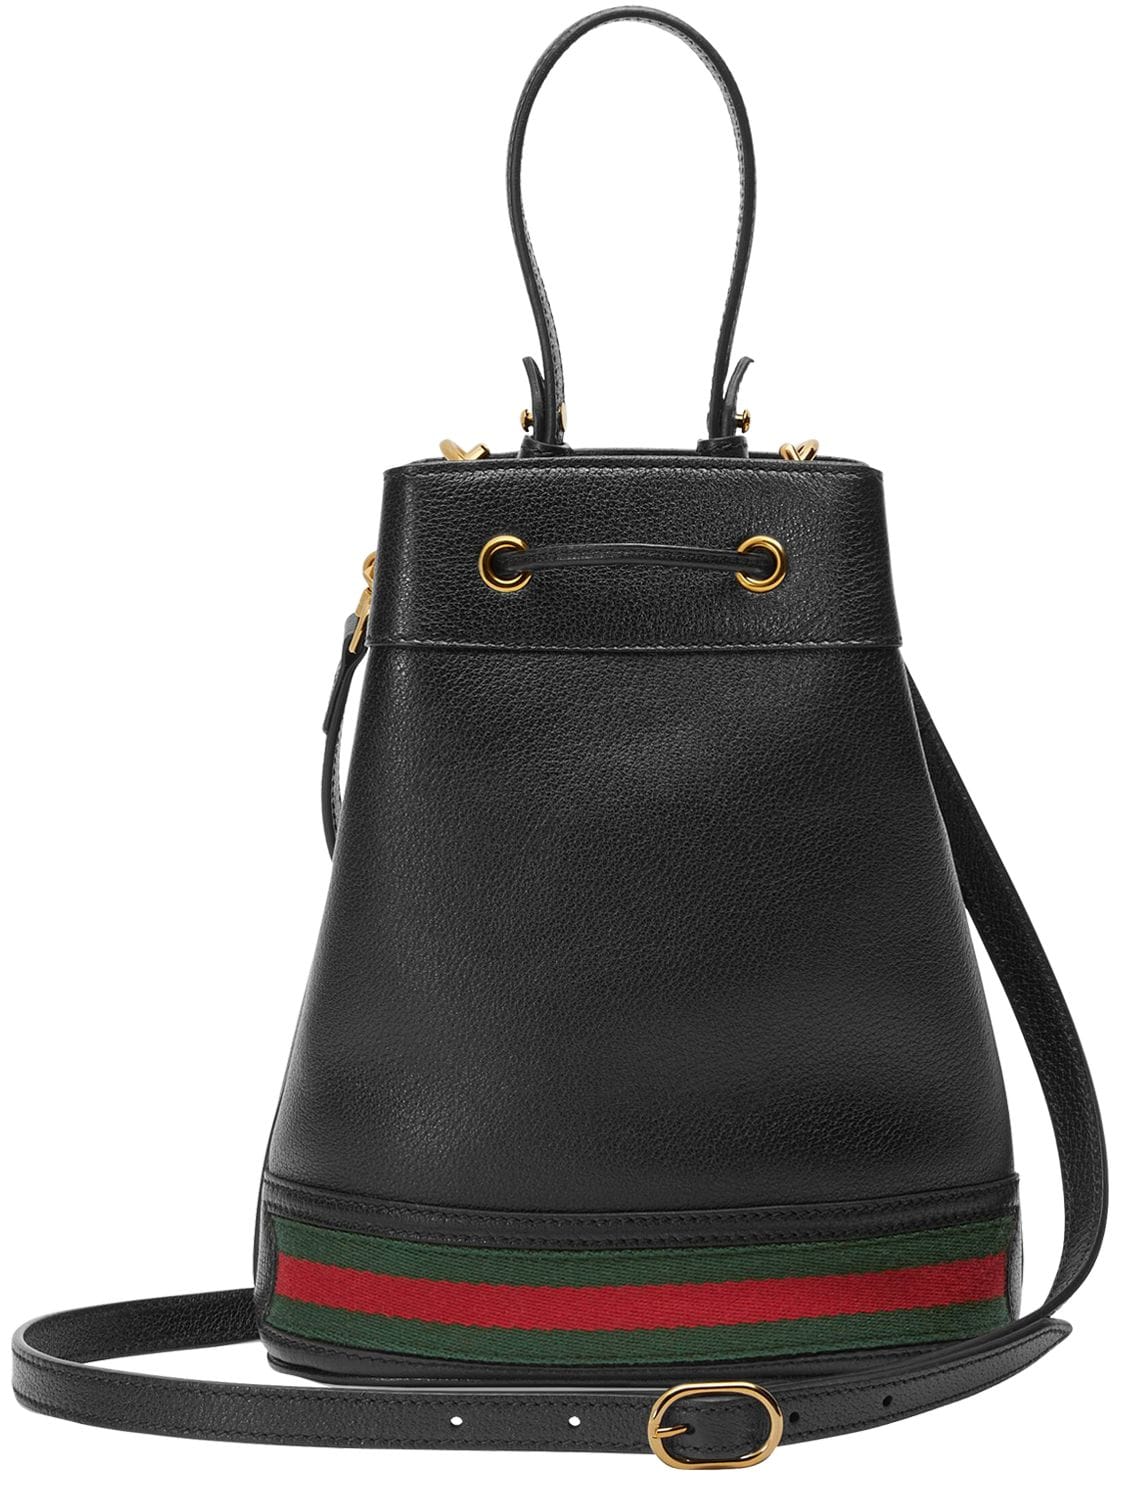 Gucci Ophidia Leather Bucket Bag In Black | ModeSens